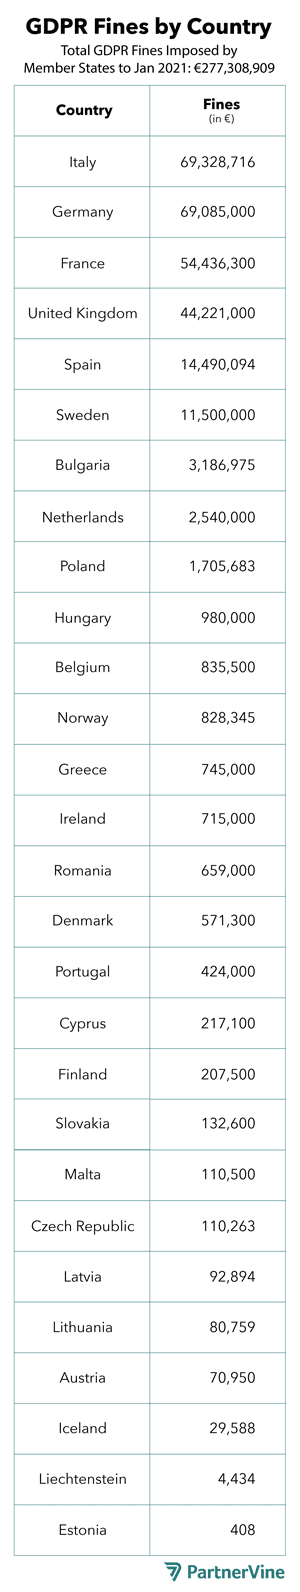 Complete table of GDPR Fines by country